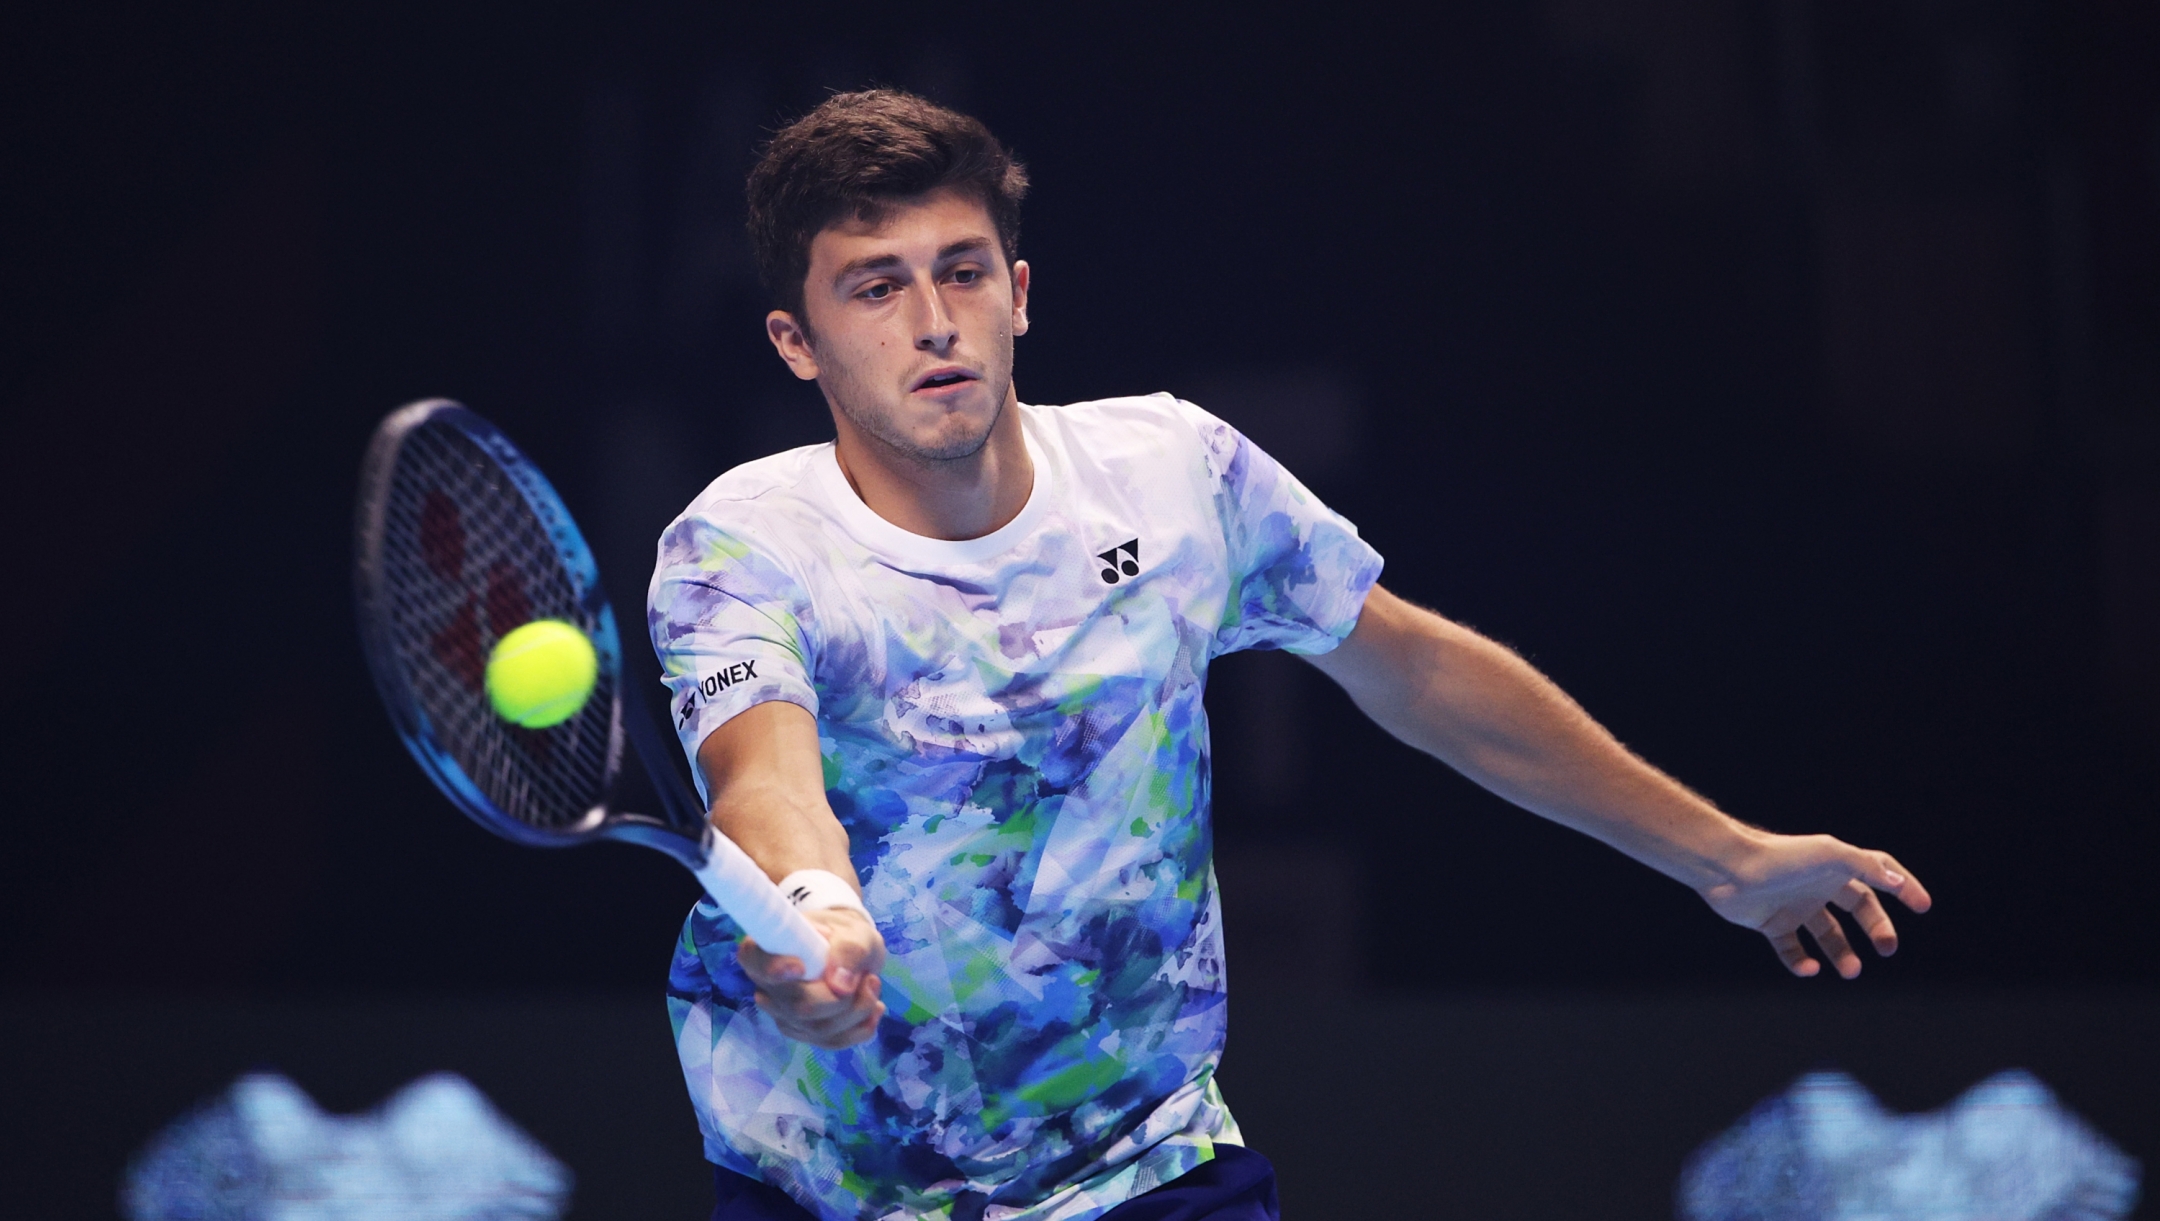 JEDDAH, SAUDI ARABIA - NOVEMBER 30: Luca Nardi of Italy hits a forehand to Flavio Cobolli of Italy in the third round robin match during day three of the Next Gen ATP Finals at King Abdullah Sports City on November 30, 2023 in Jeddah, Saudi Arabia. (Photo by Adam Pretty/Getty Images)